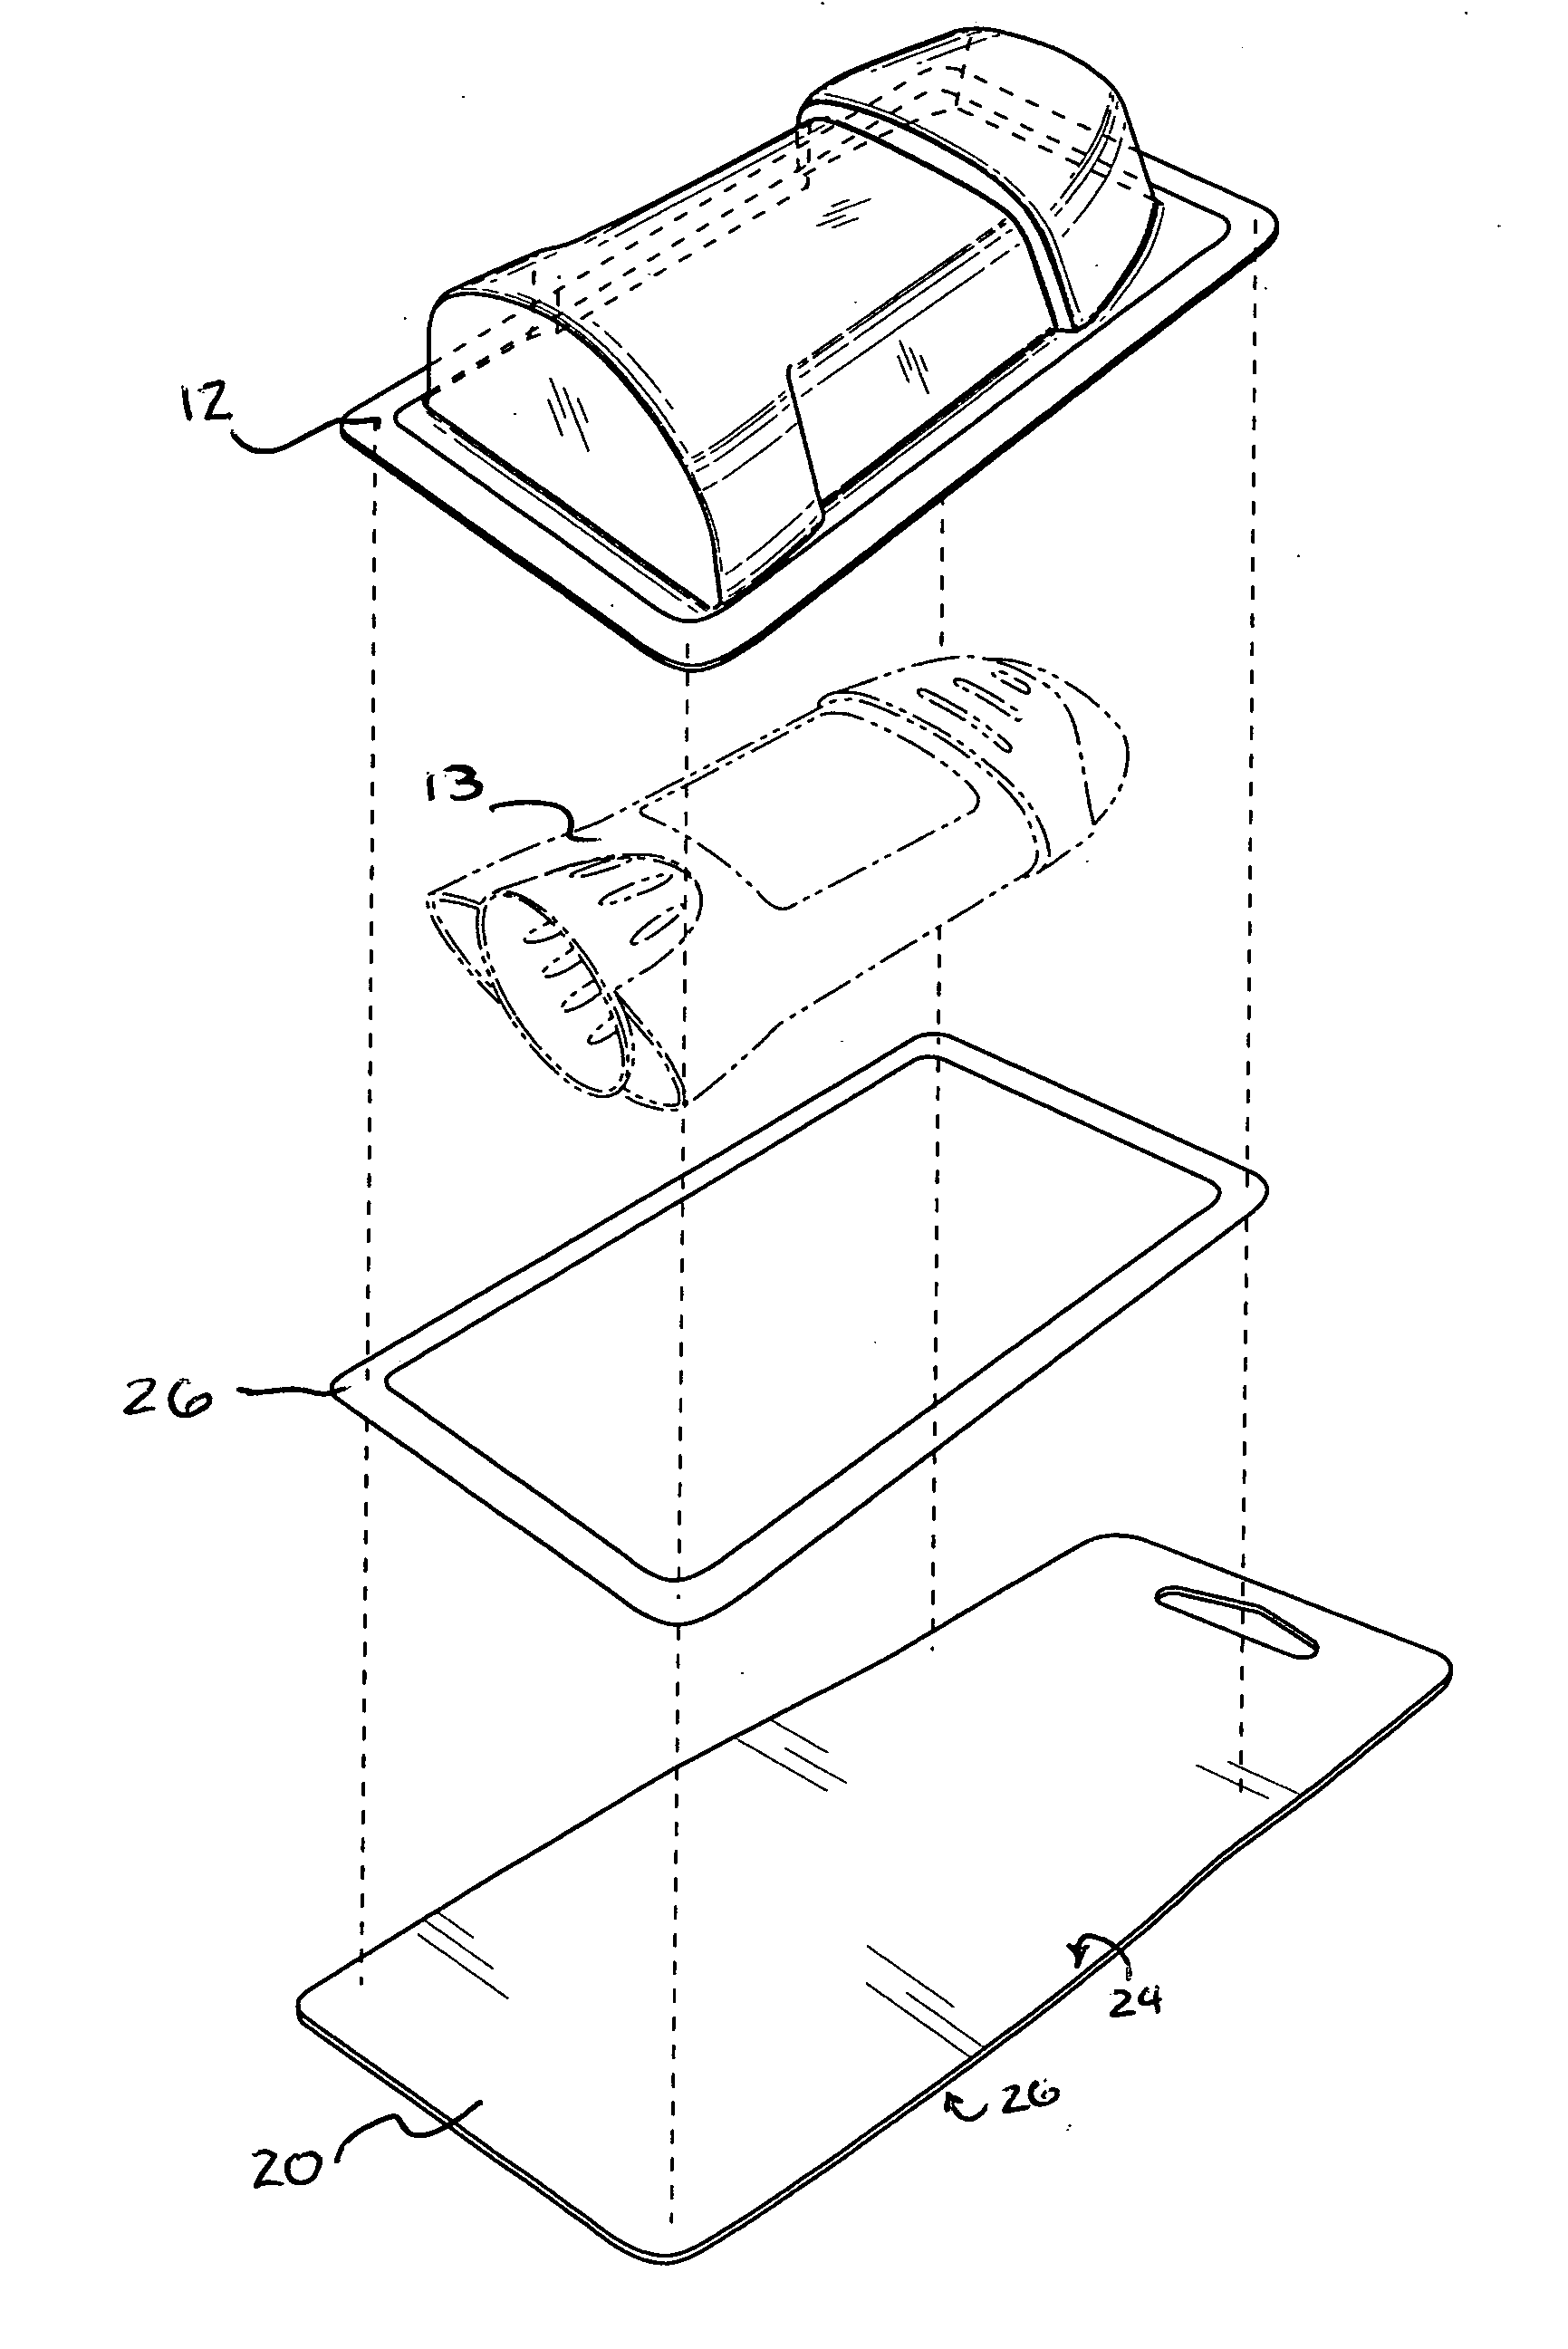 Blister package for adhesive compositions